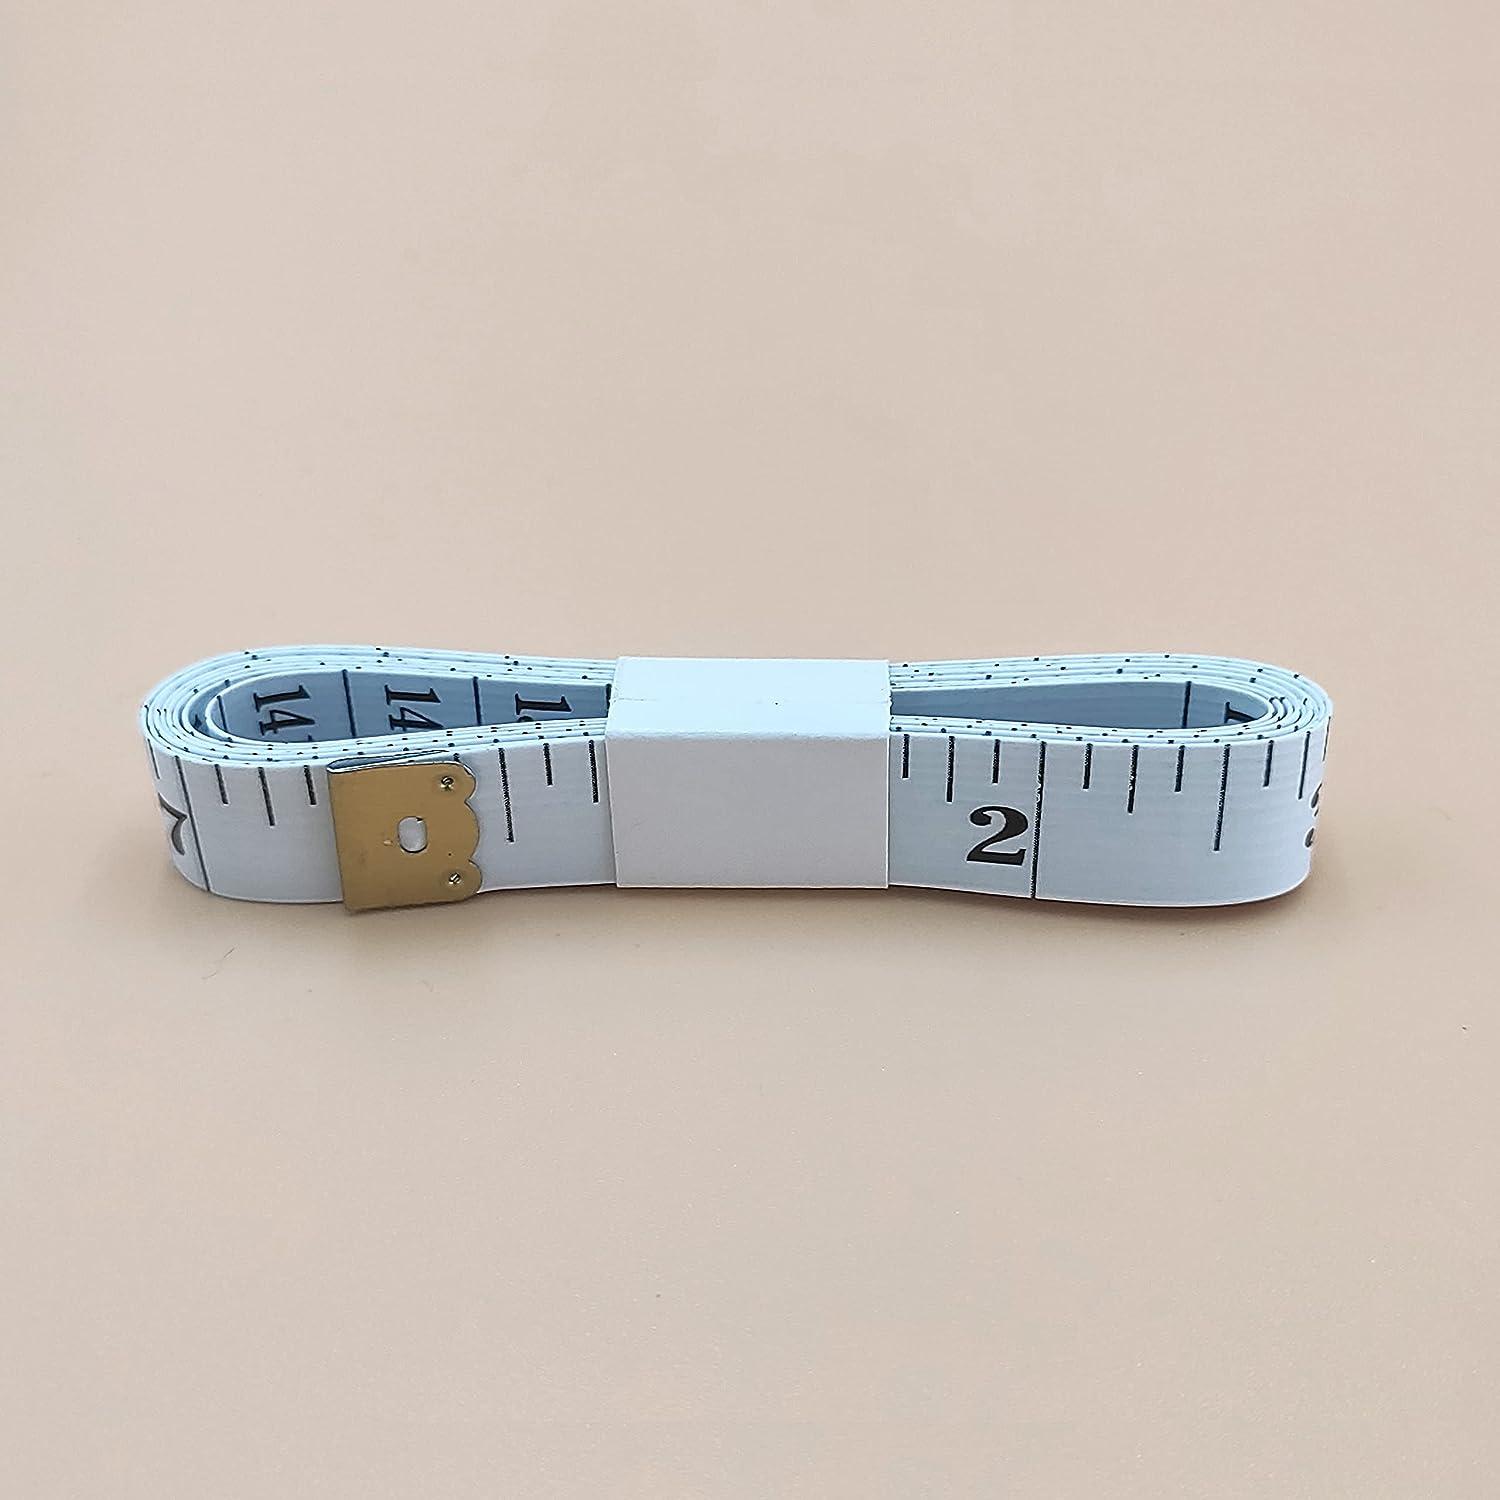 1 New 60 150cm Soft Fabric Cloth Tape Measure Ruler Dual Sided SAE Metric  Diet 